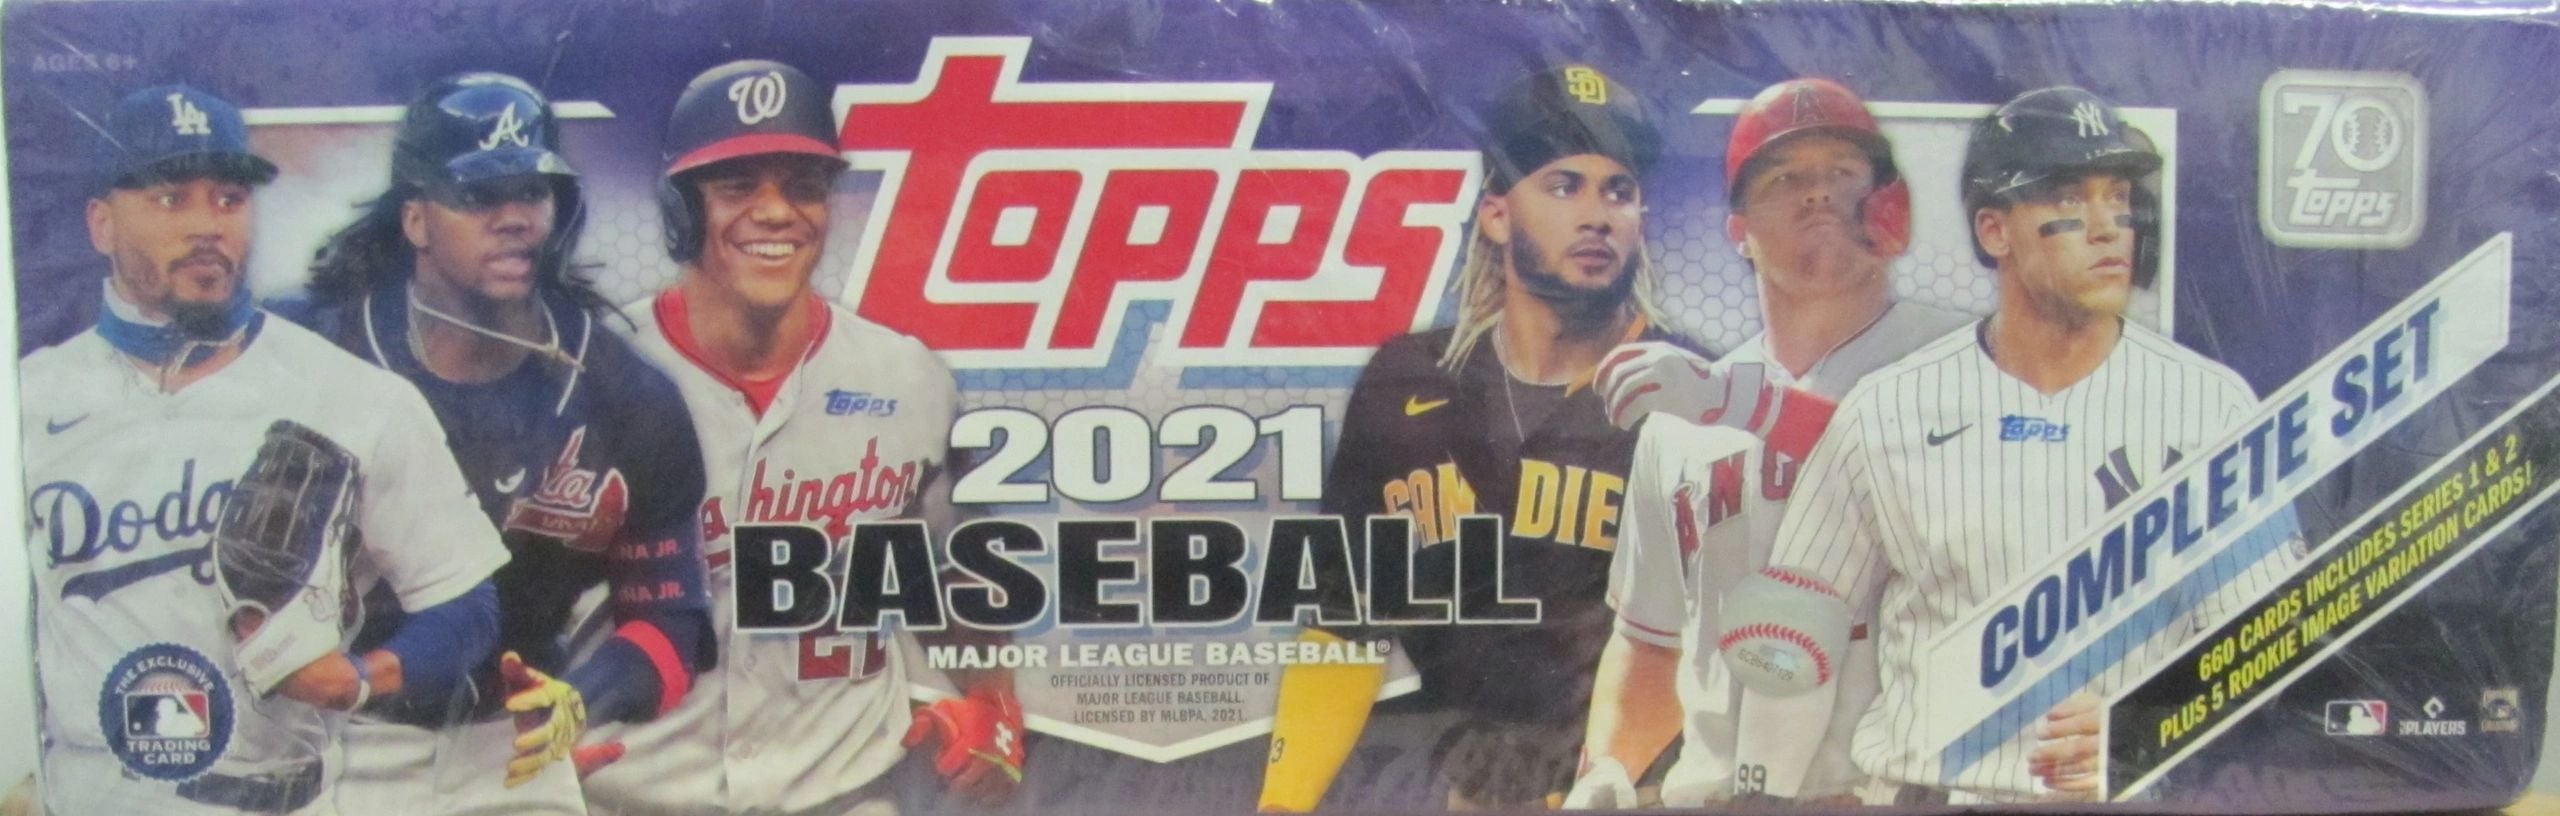 Topps 2021 Baseball Factory Sealed Complete Retail Box (660 Cards 5 Rookie Variations)